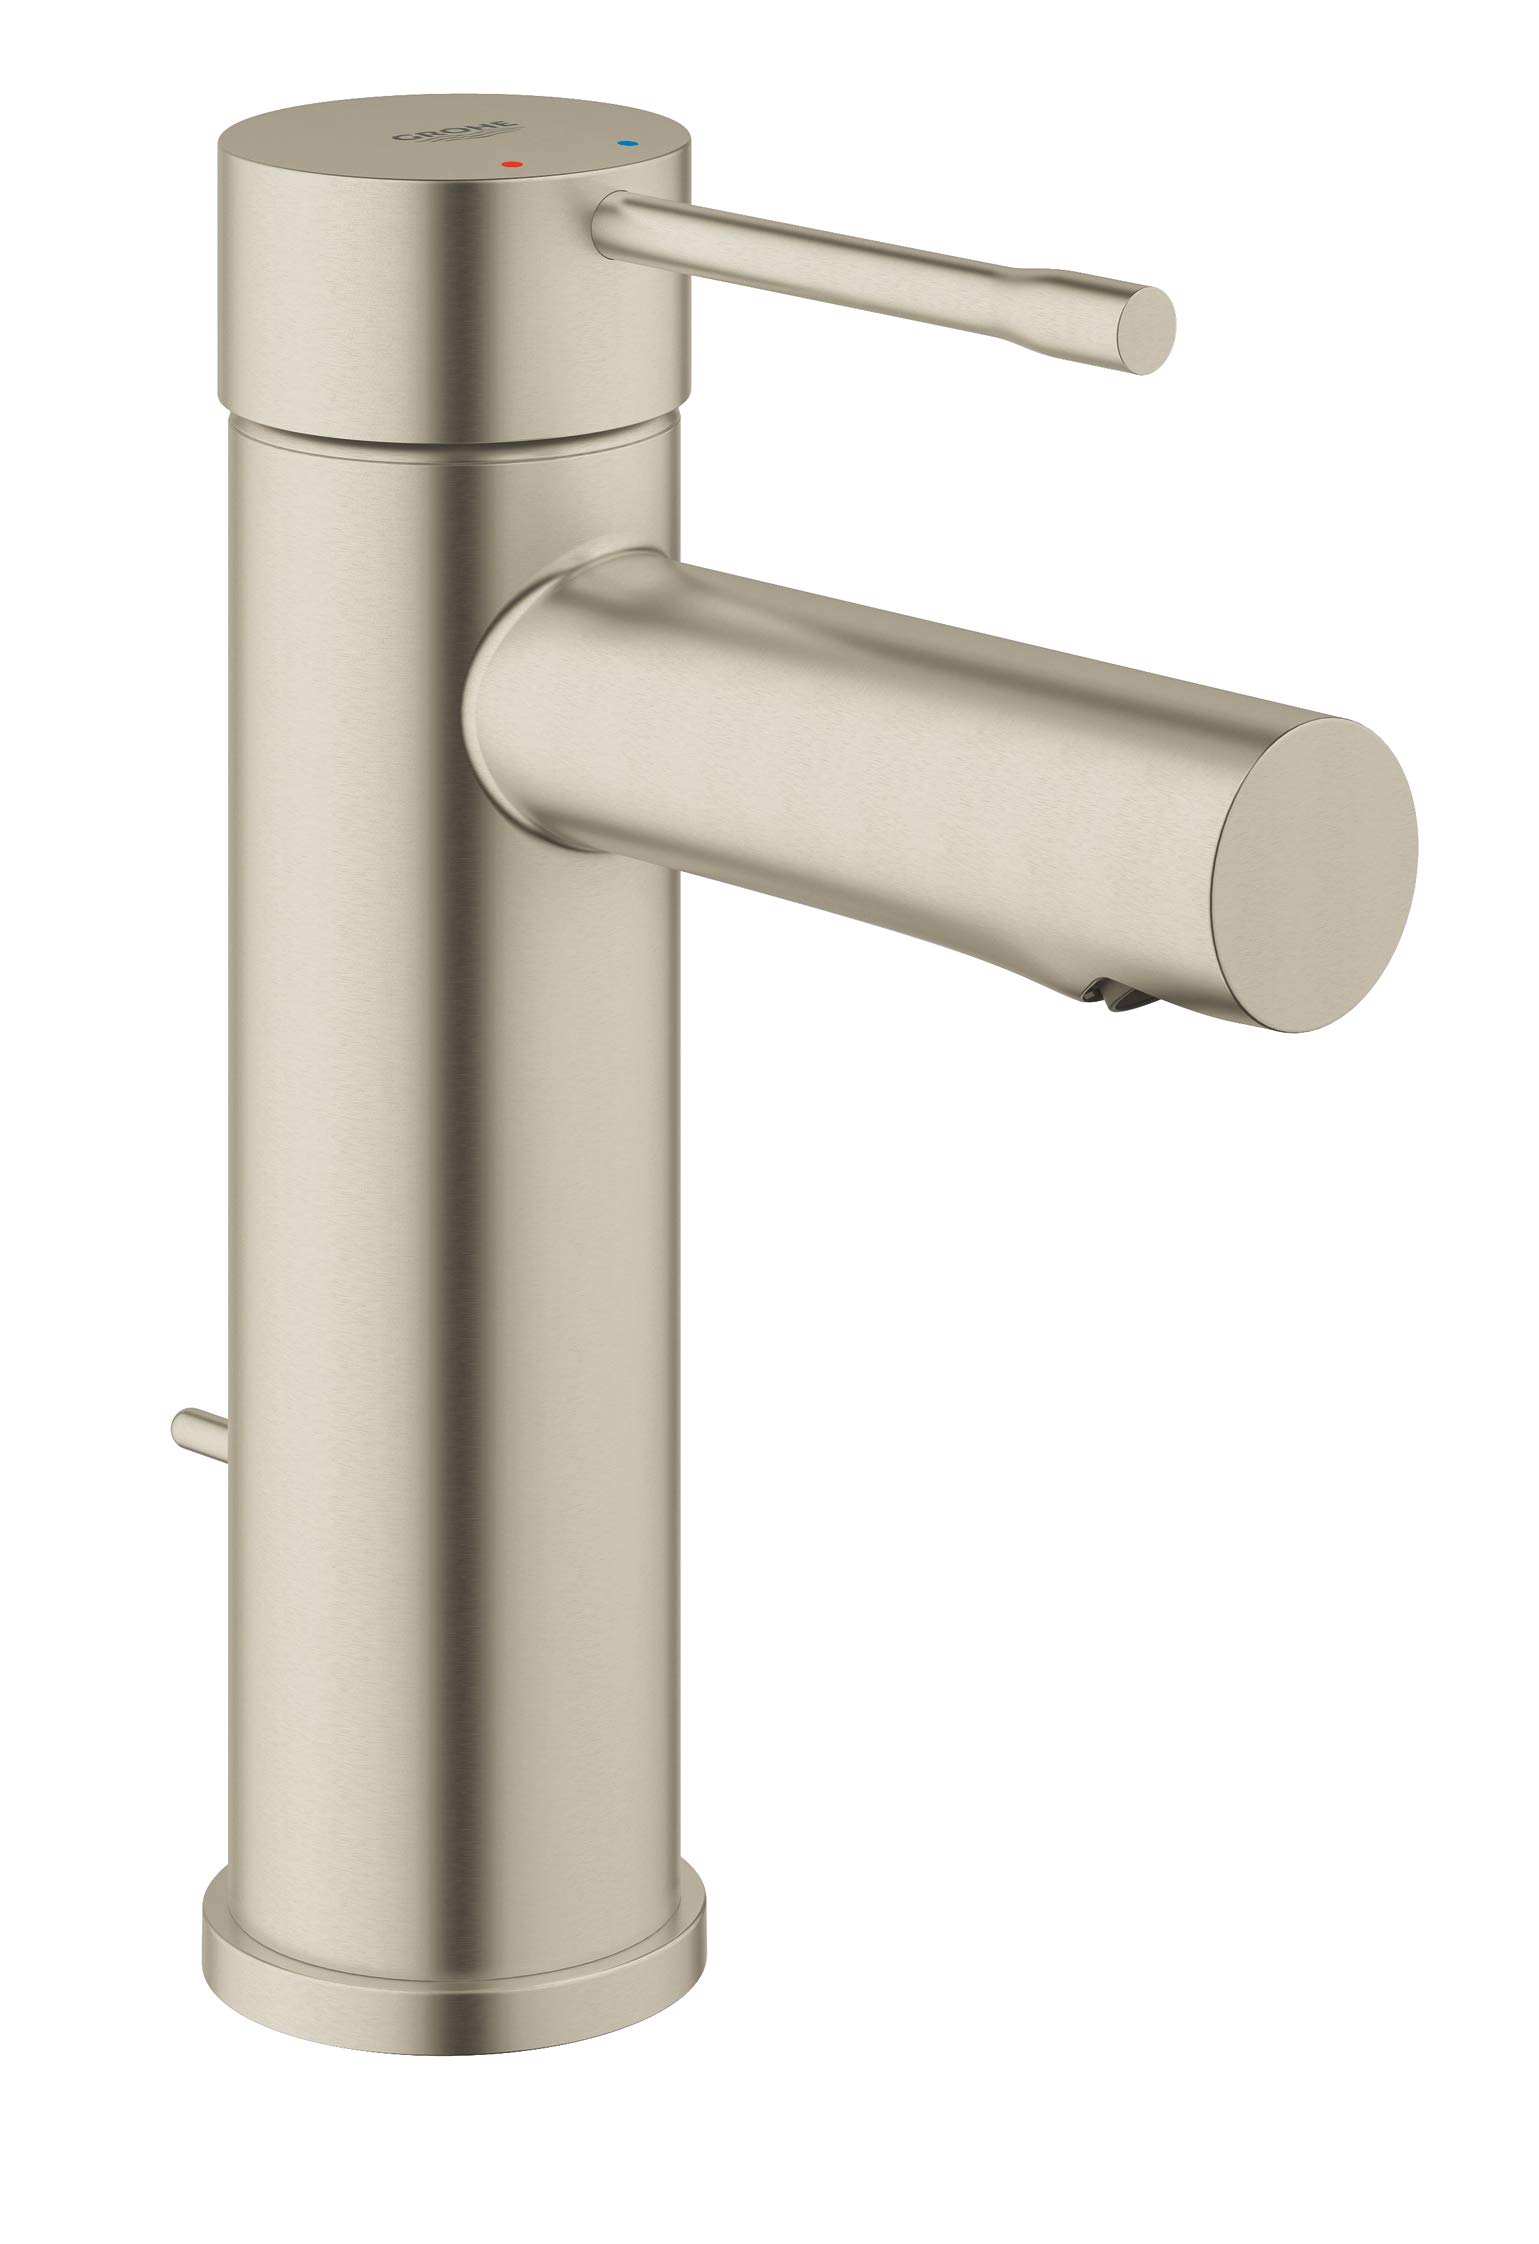 GROHE 32216ENA Essence Single Hole Bathroom Faucet with Single Handle, Size Small, Brass, Brushed Nickel Infinity Finish